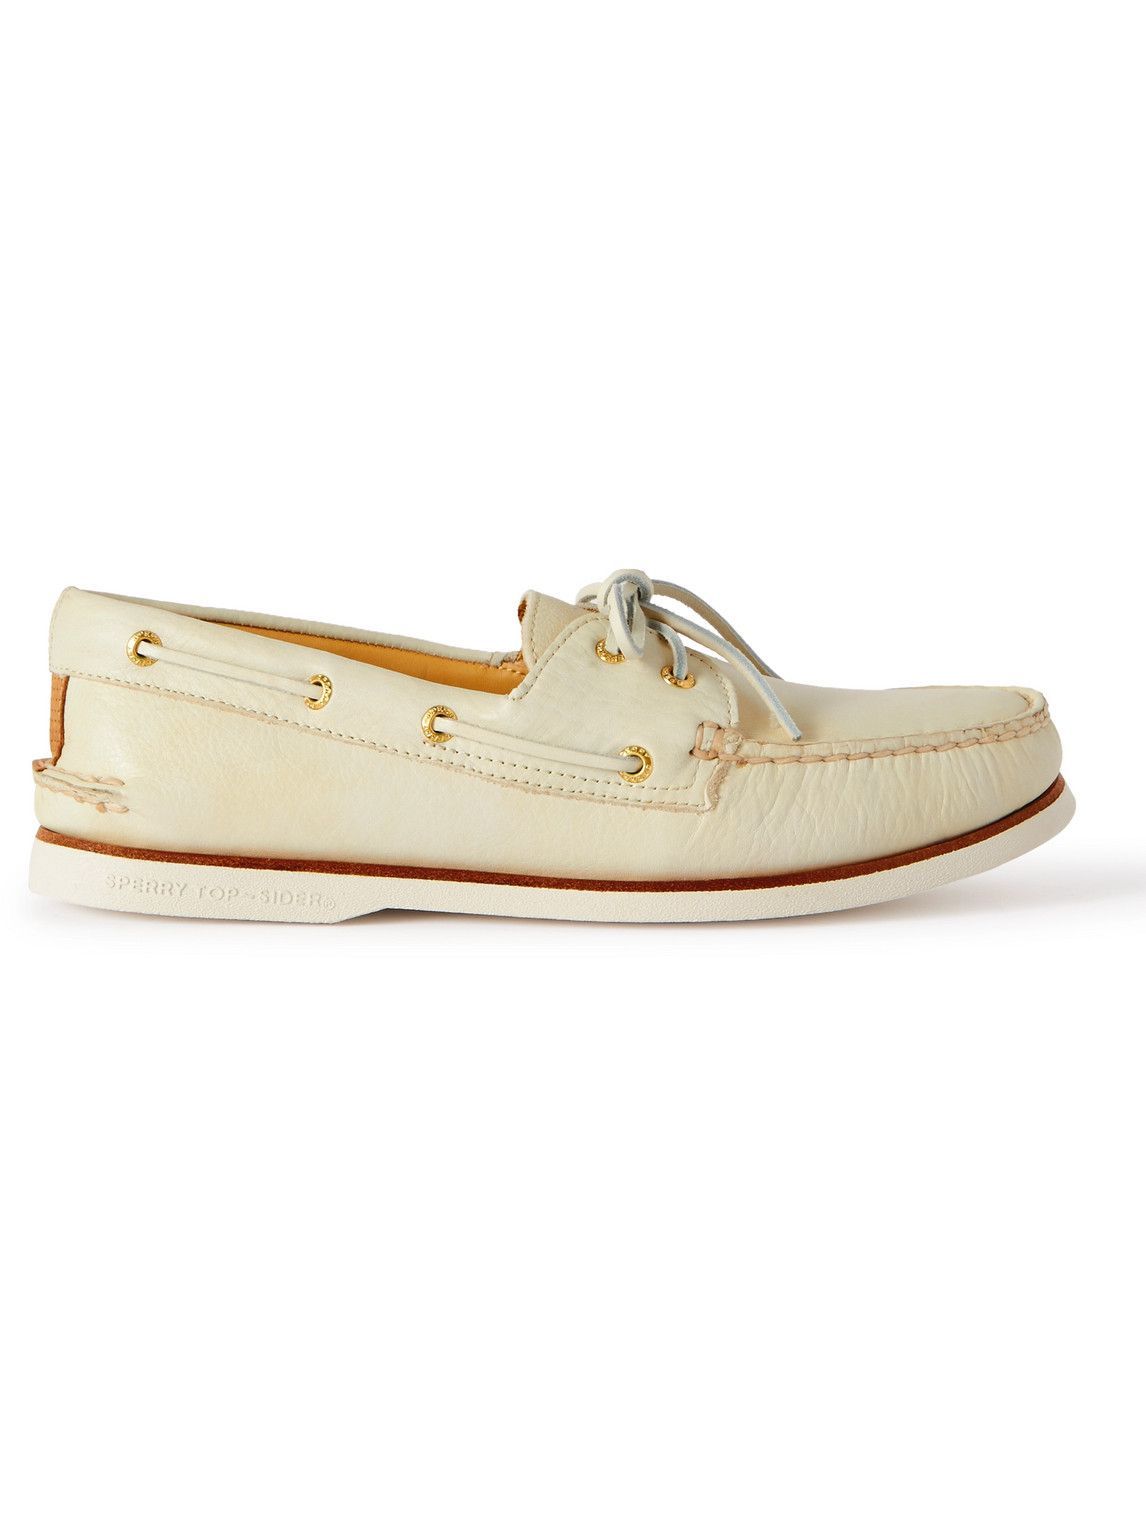 loyalitet halvø tema Sperry - Gold Cup Authentic Original Full-Grain Leather Boat Shoes -  Neutrals Sperry Topsider